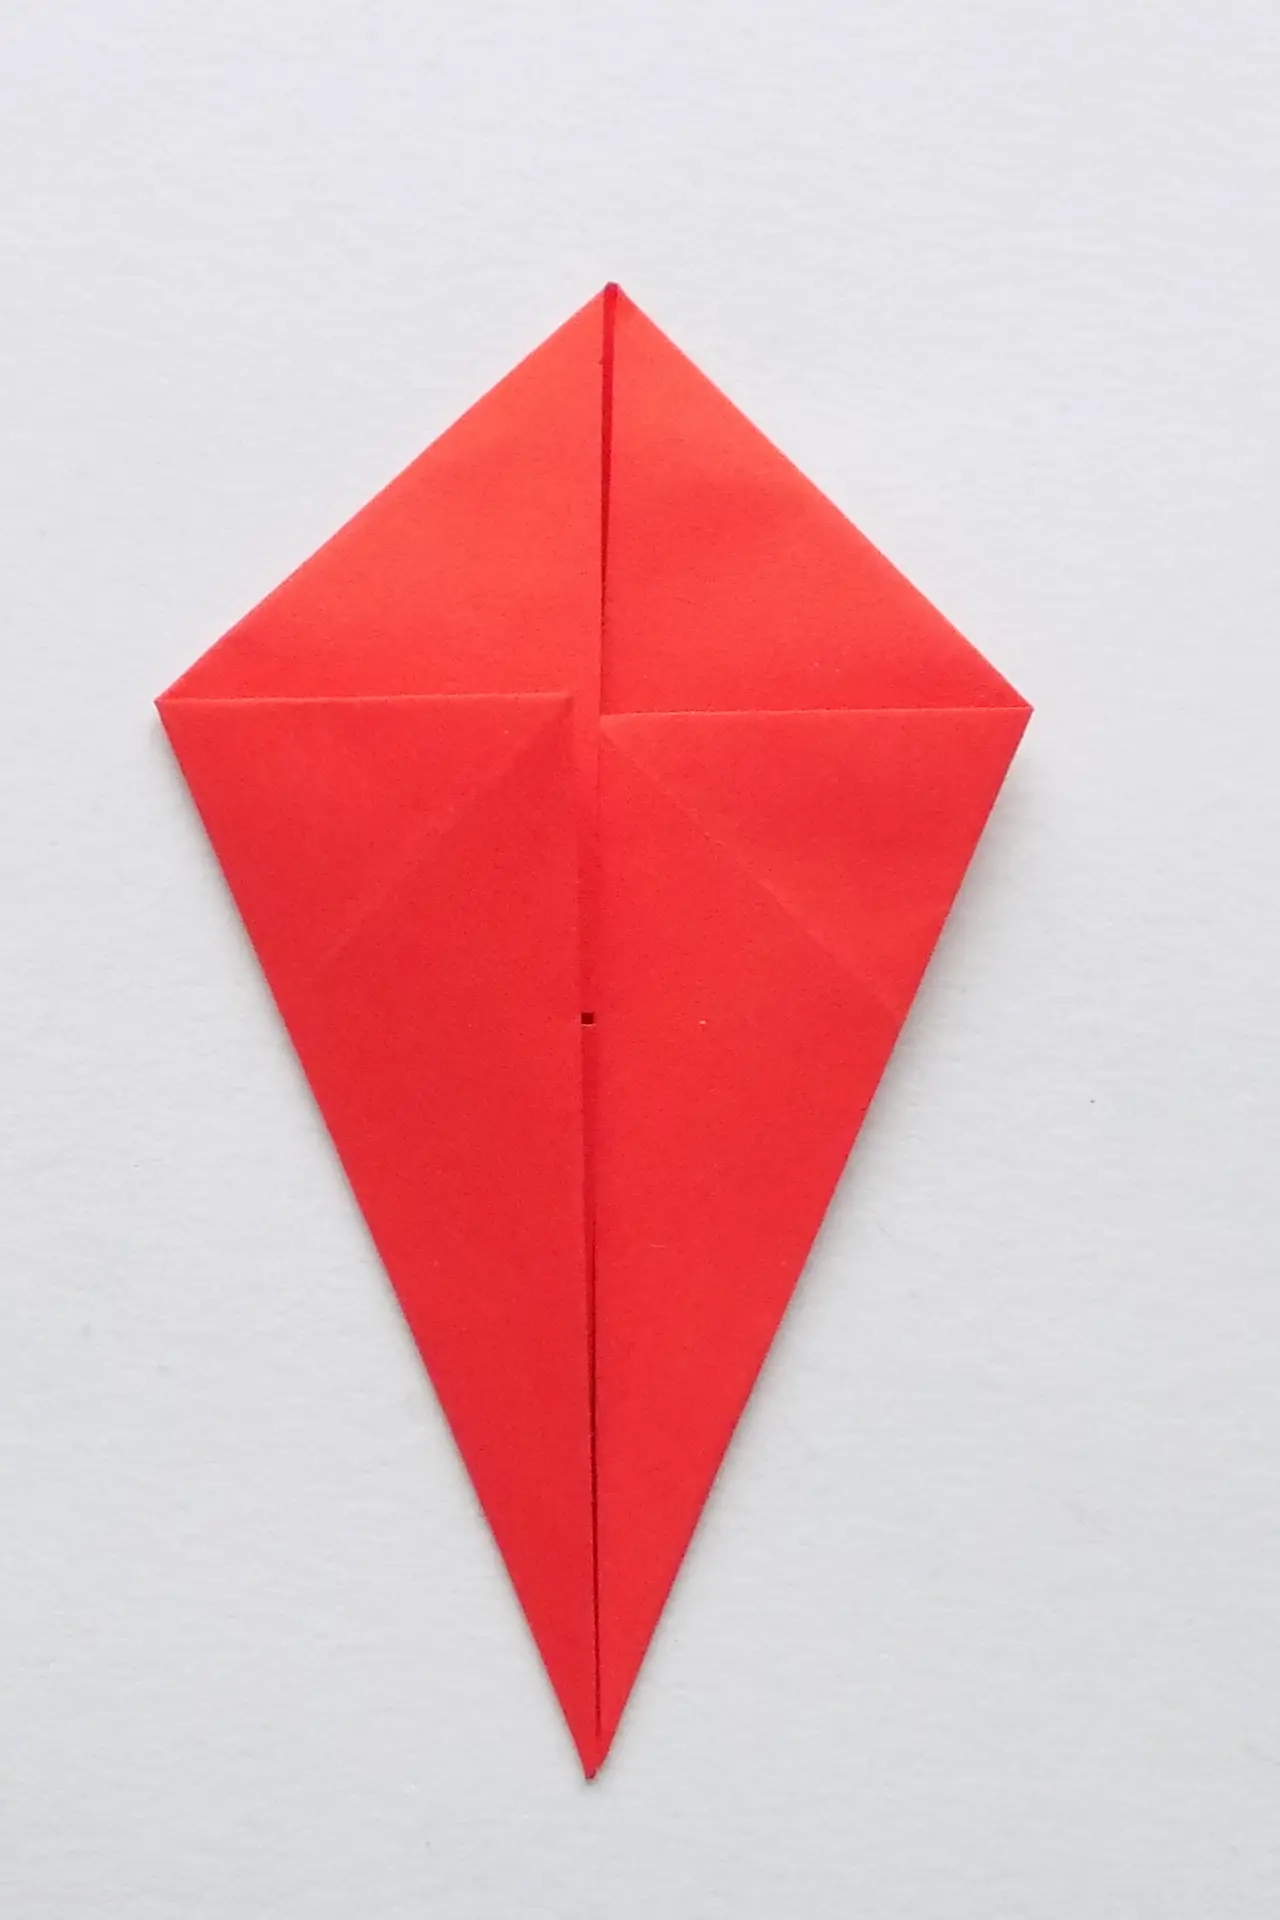 Make a rhombus from the square